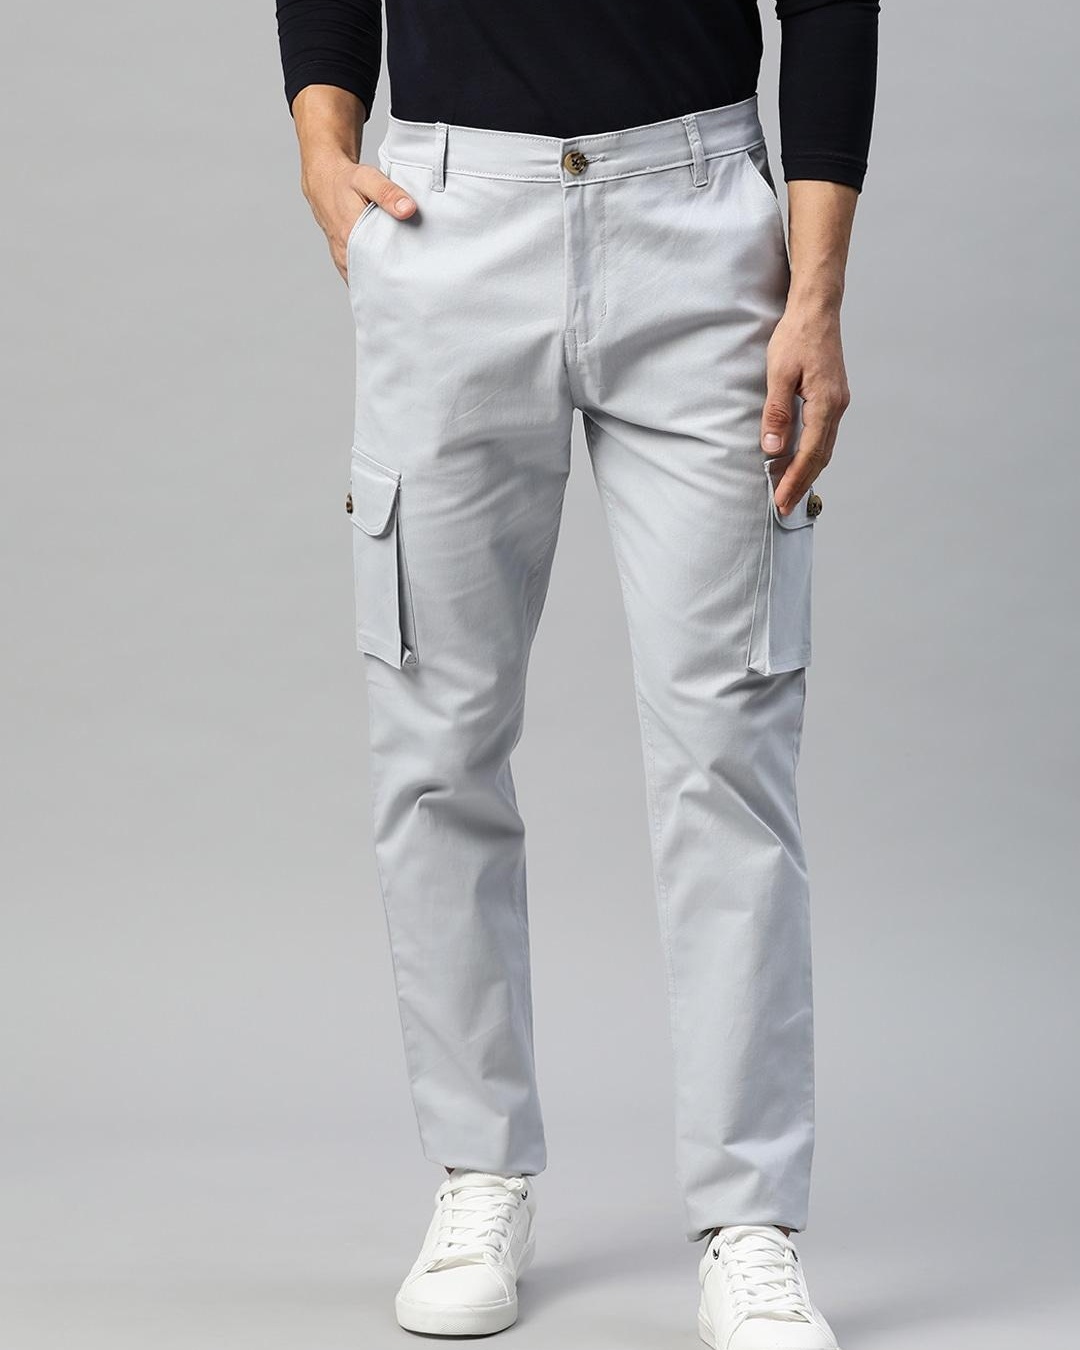 CELIO Casual Trousers  Buy CELIO Mens Black Solid Cargo Trouser Online   Nykaa Fashion